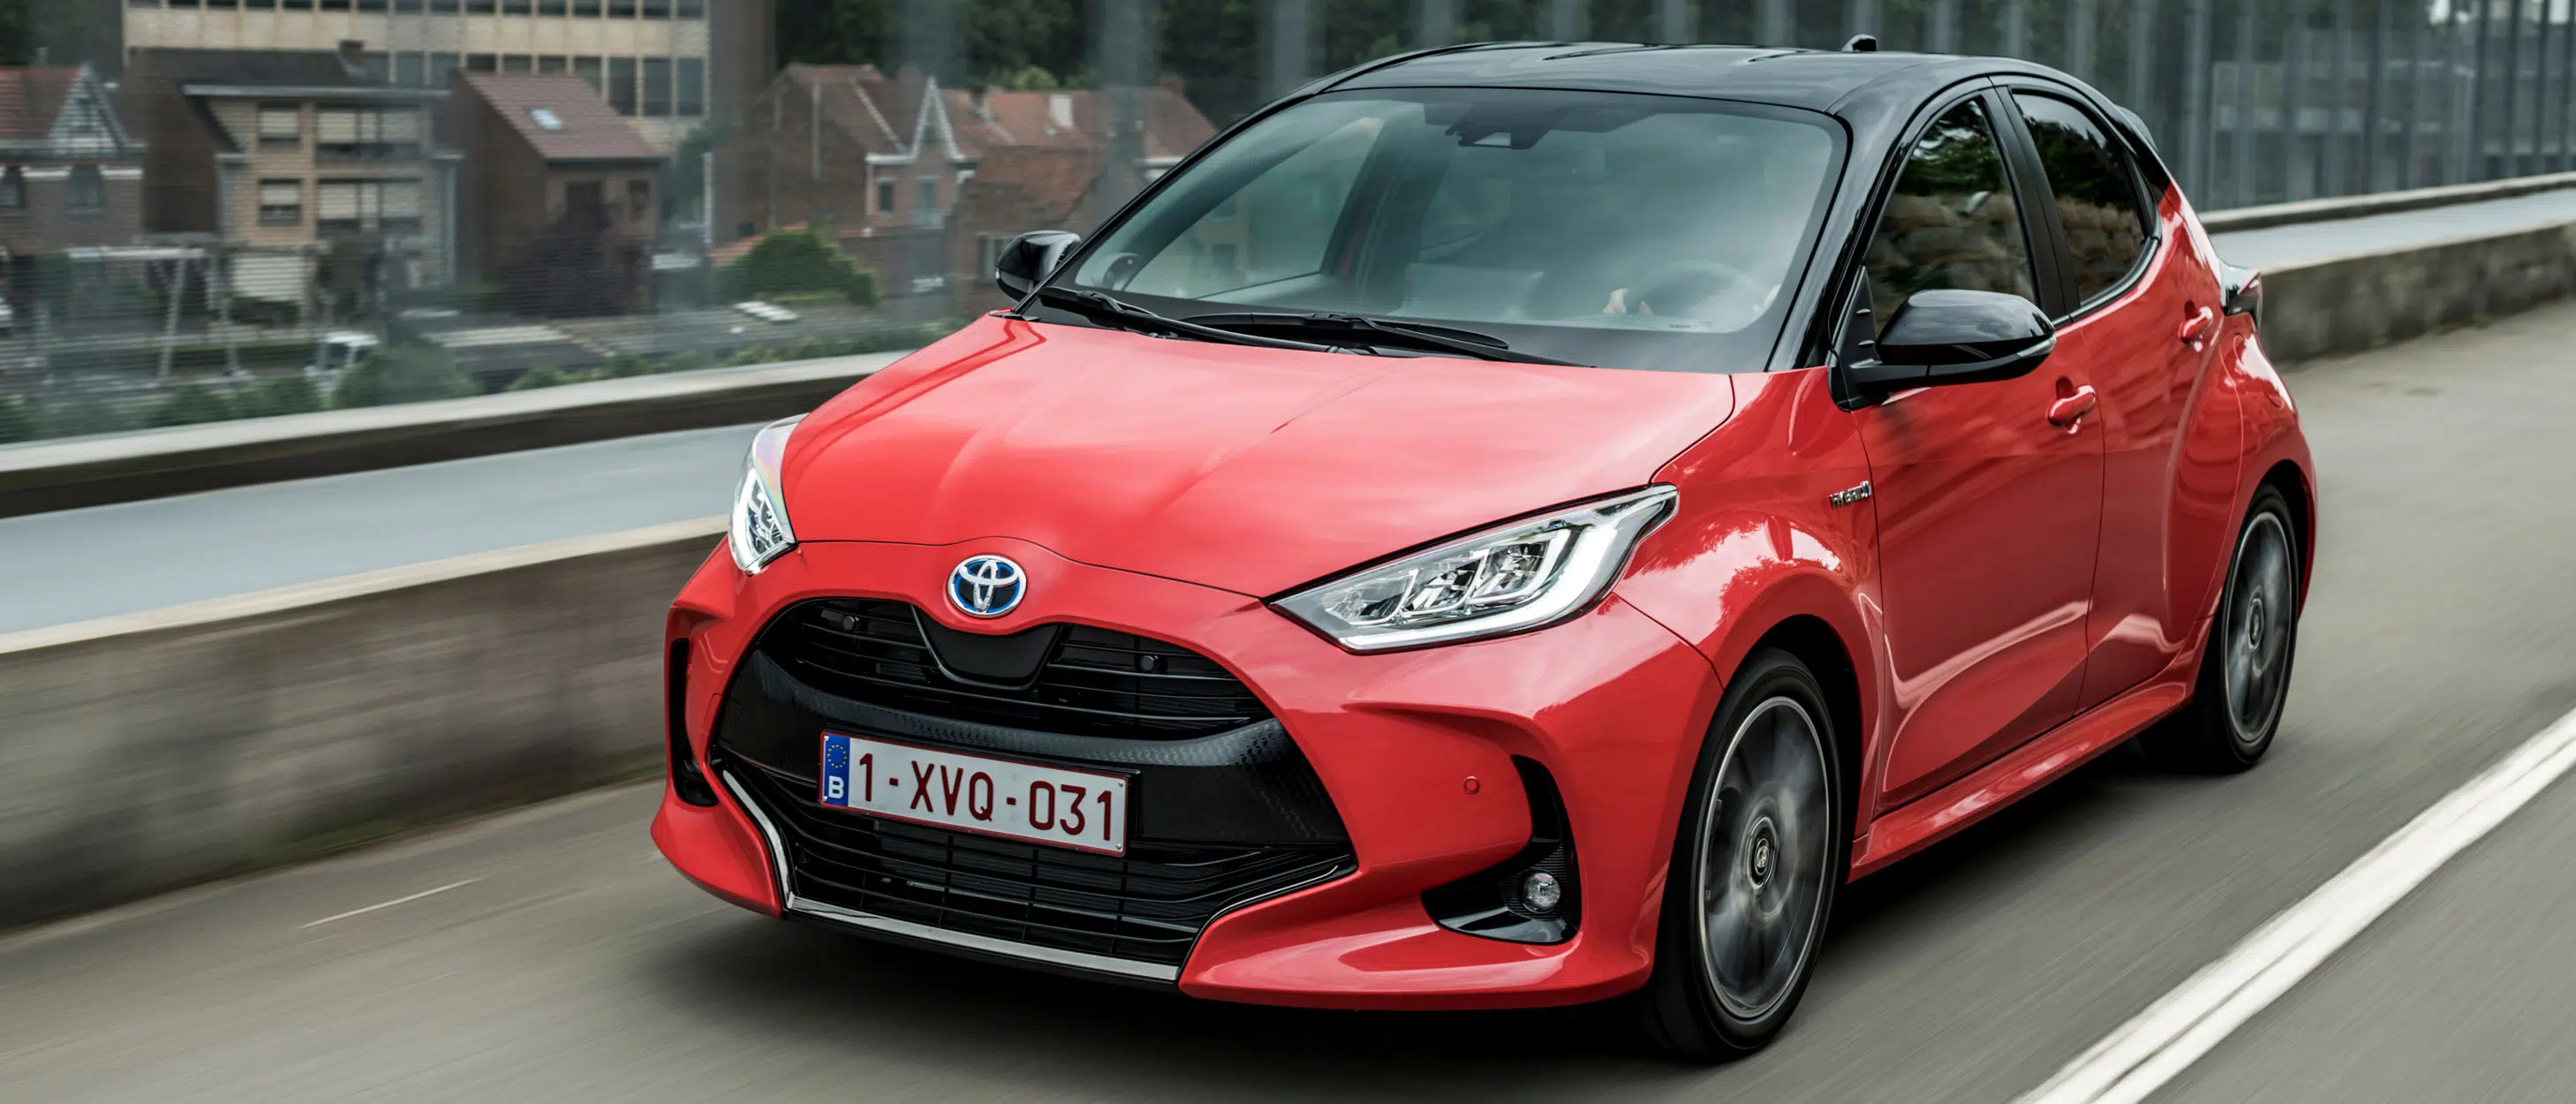 The all-new Toyota Yaris - Toyota Connect